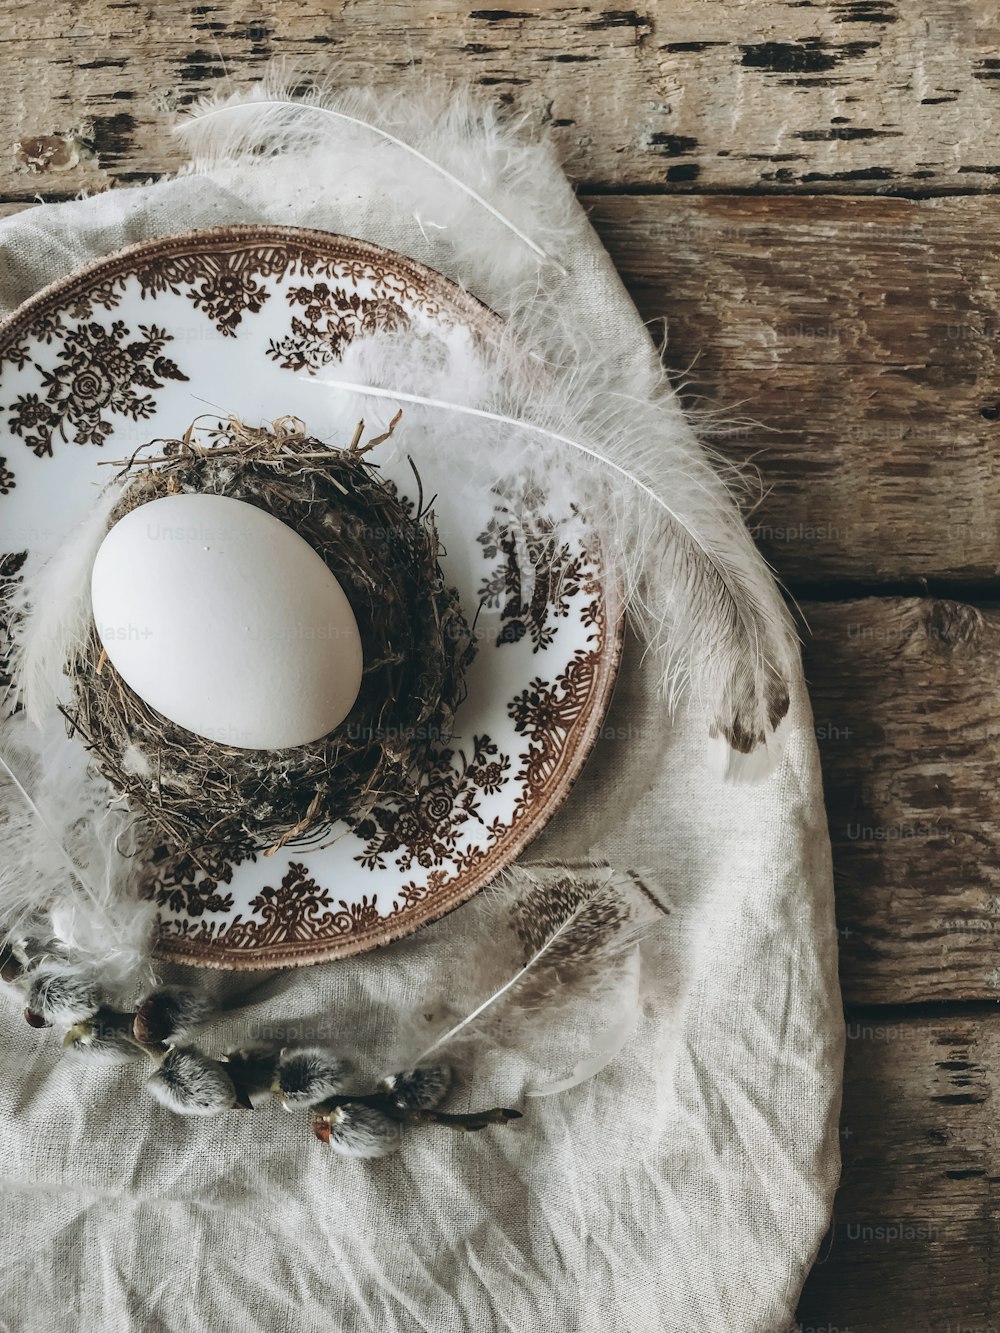 Natural easter egg in nest with soft feathers on vintage plate, linen napkin, pussy willow branches on aged wood. Stylish rustic Easter table setting. Rural Easter still life. Happy Easter